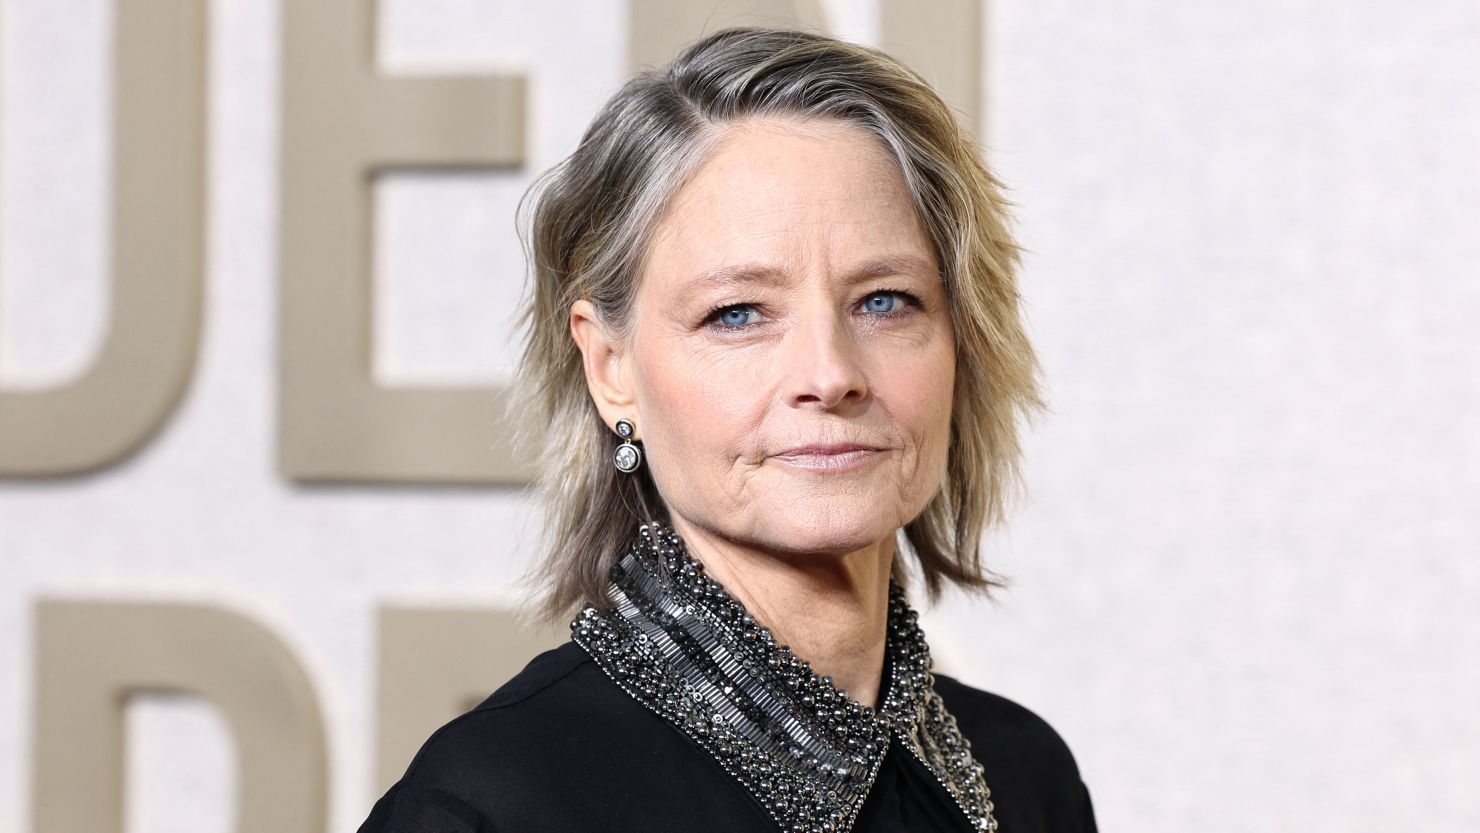 Jodie Foster describes what she finds 'really annoying' about